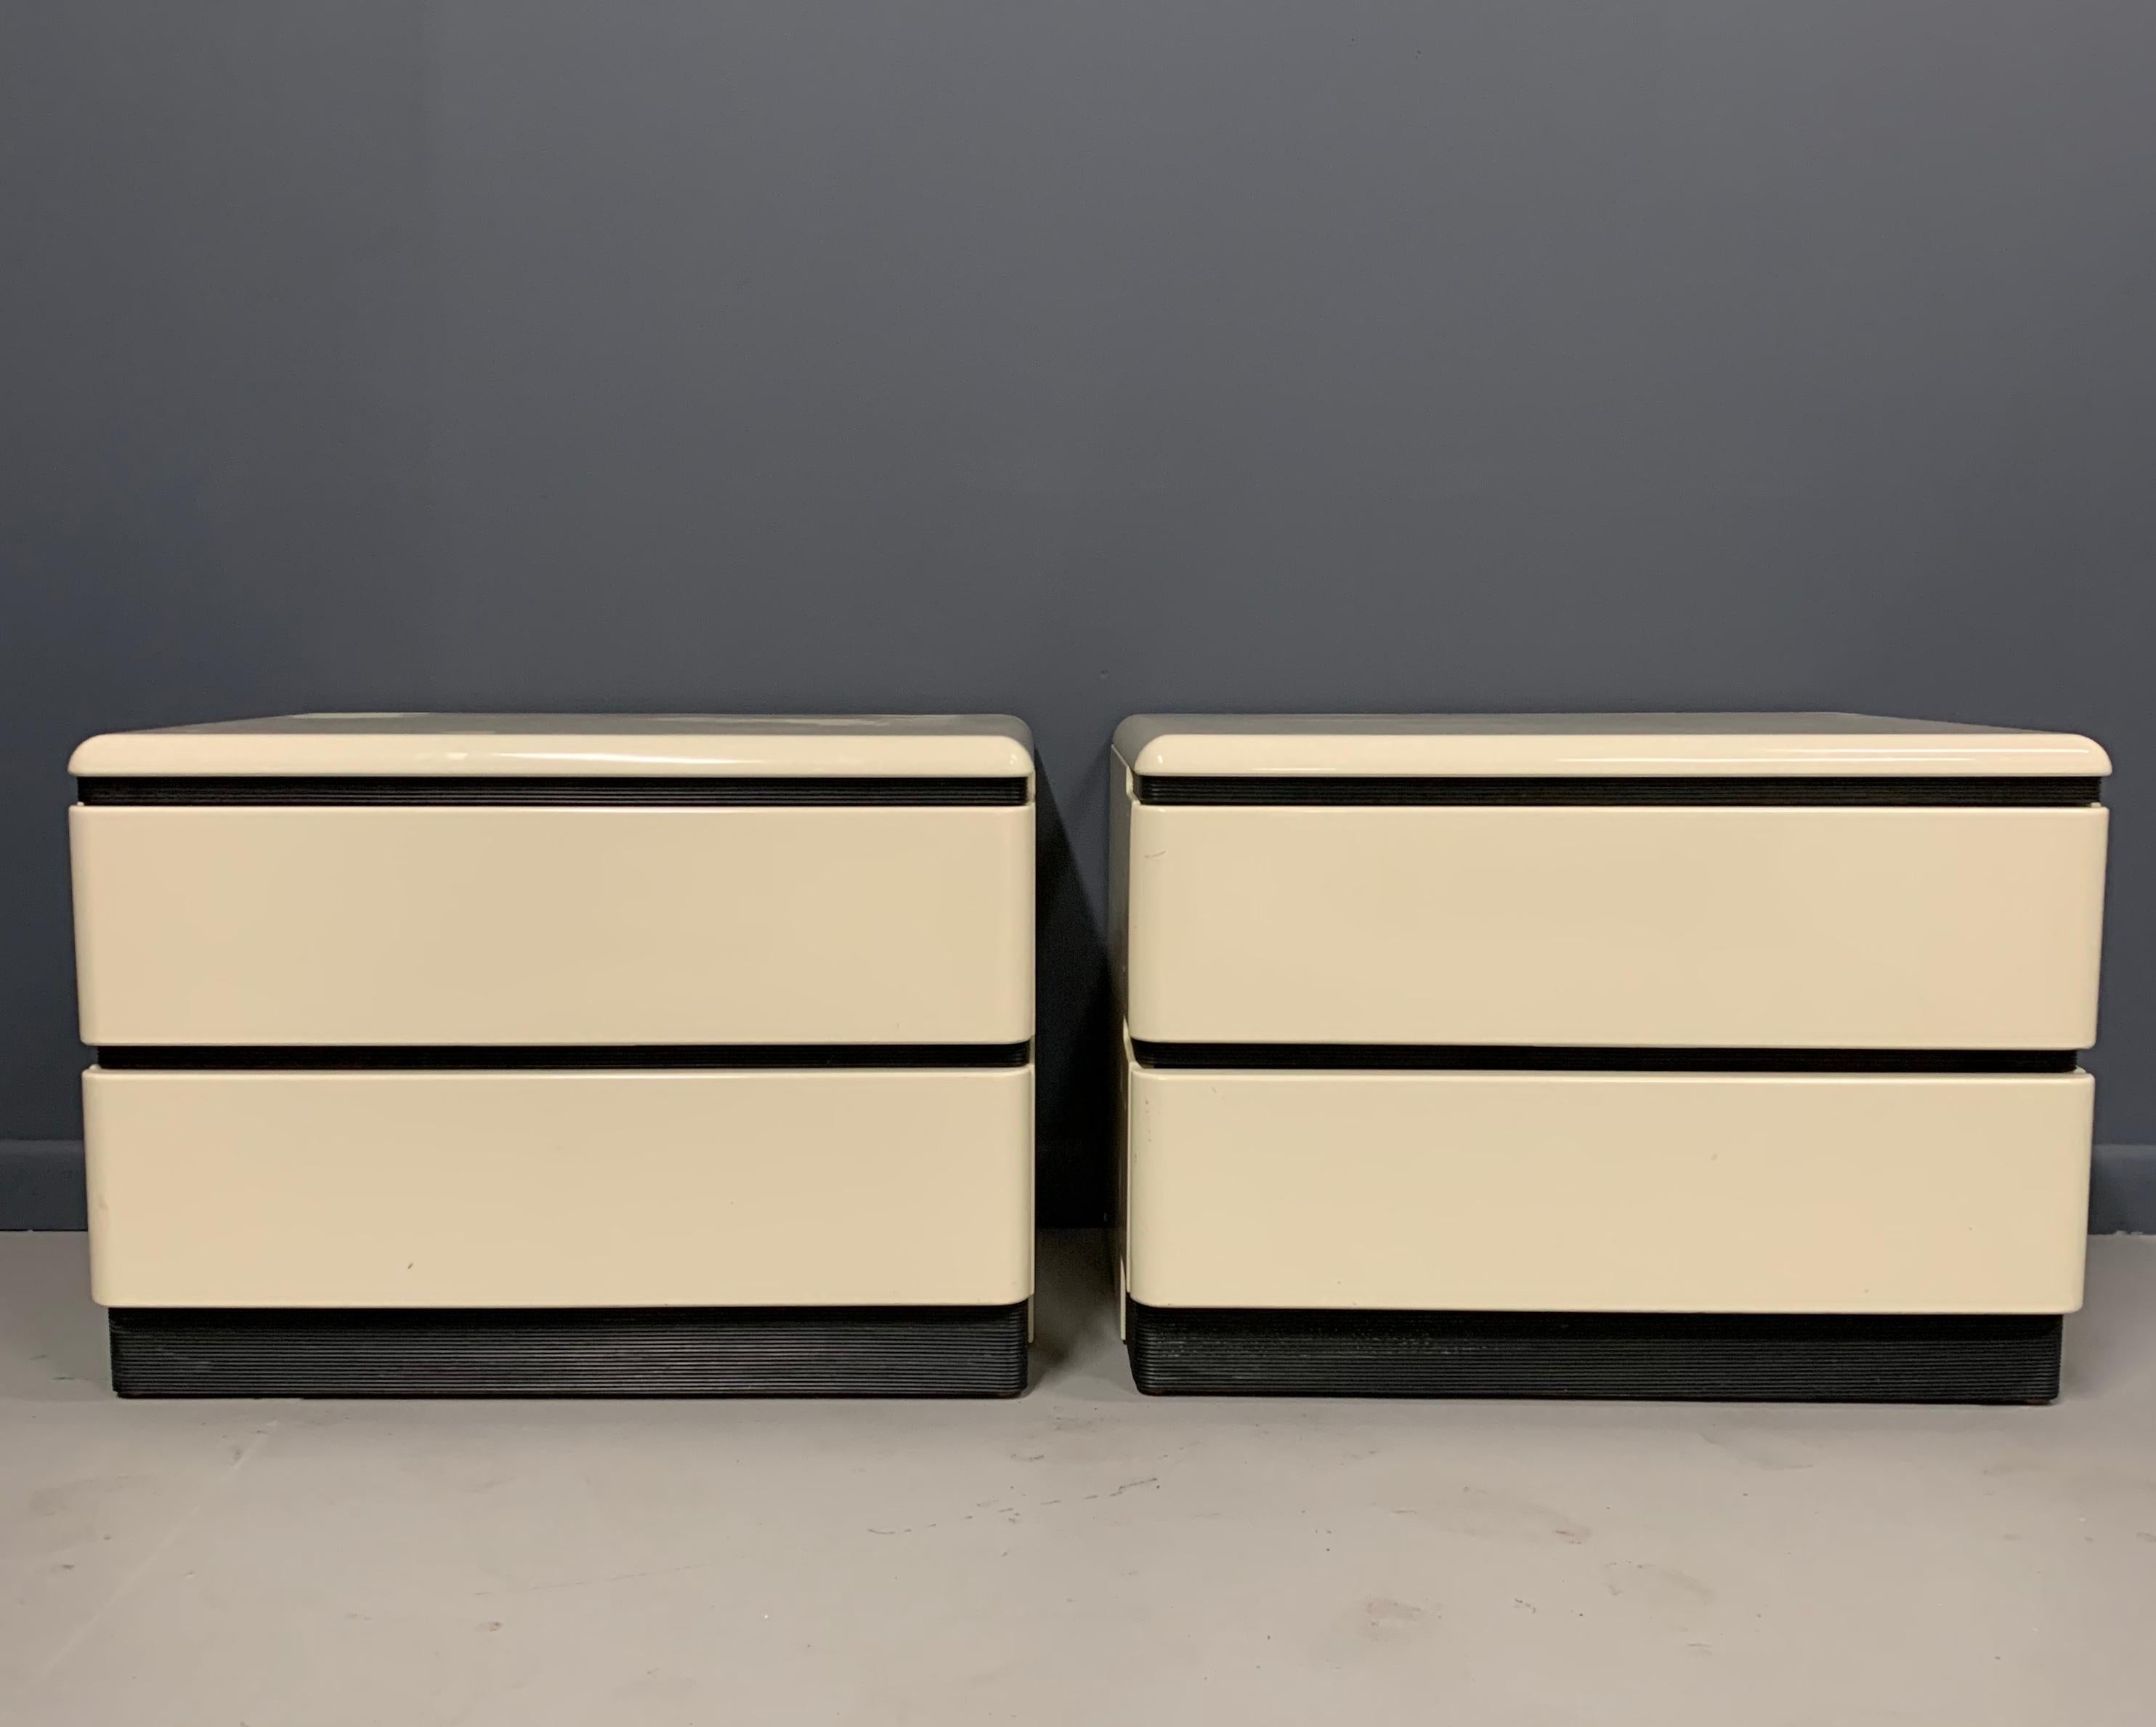 These great nightstands are a lacquered ivory color with ribbed black rubber accents. They look like they are out of the movie 2001 A Space Odyssey.